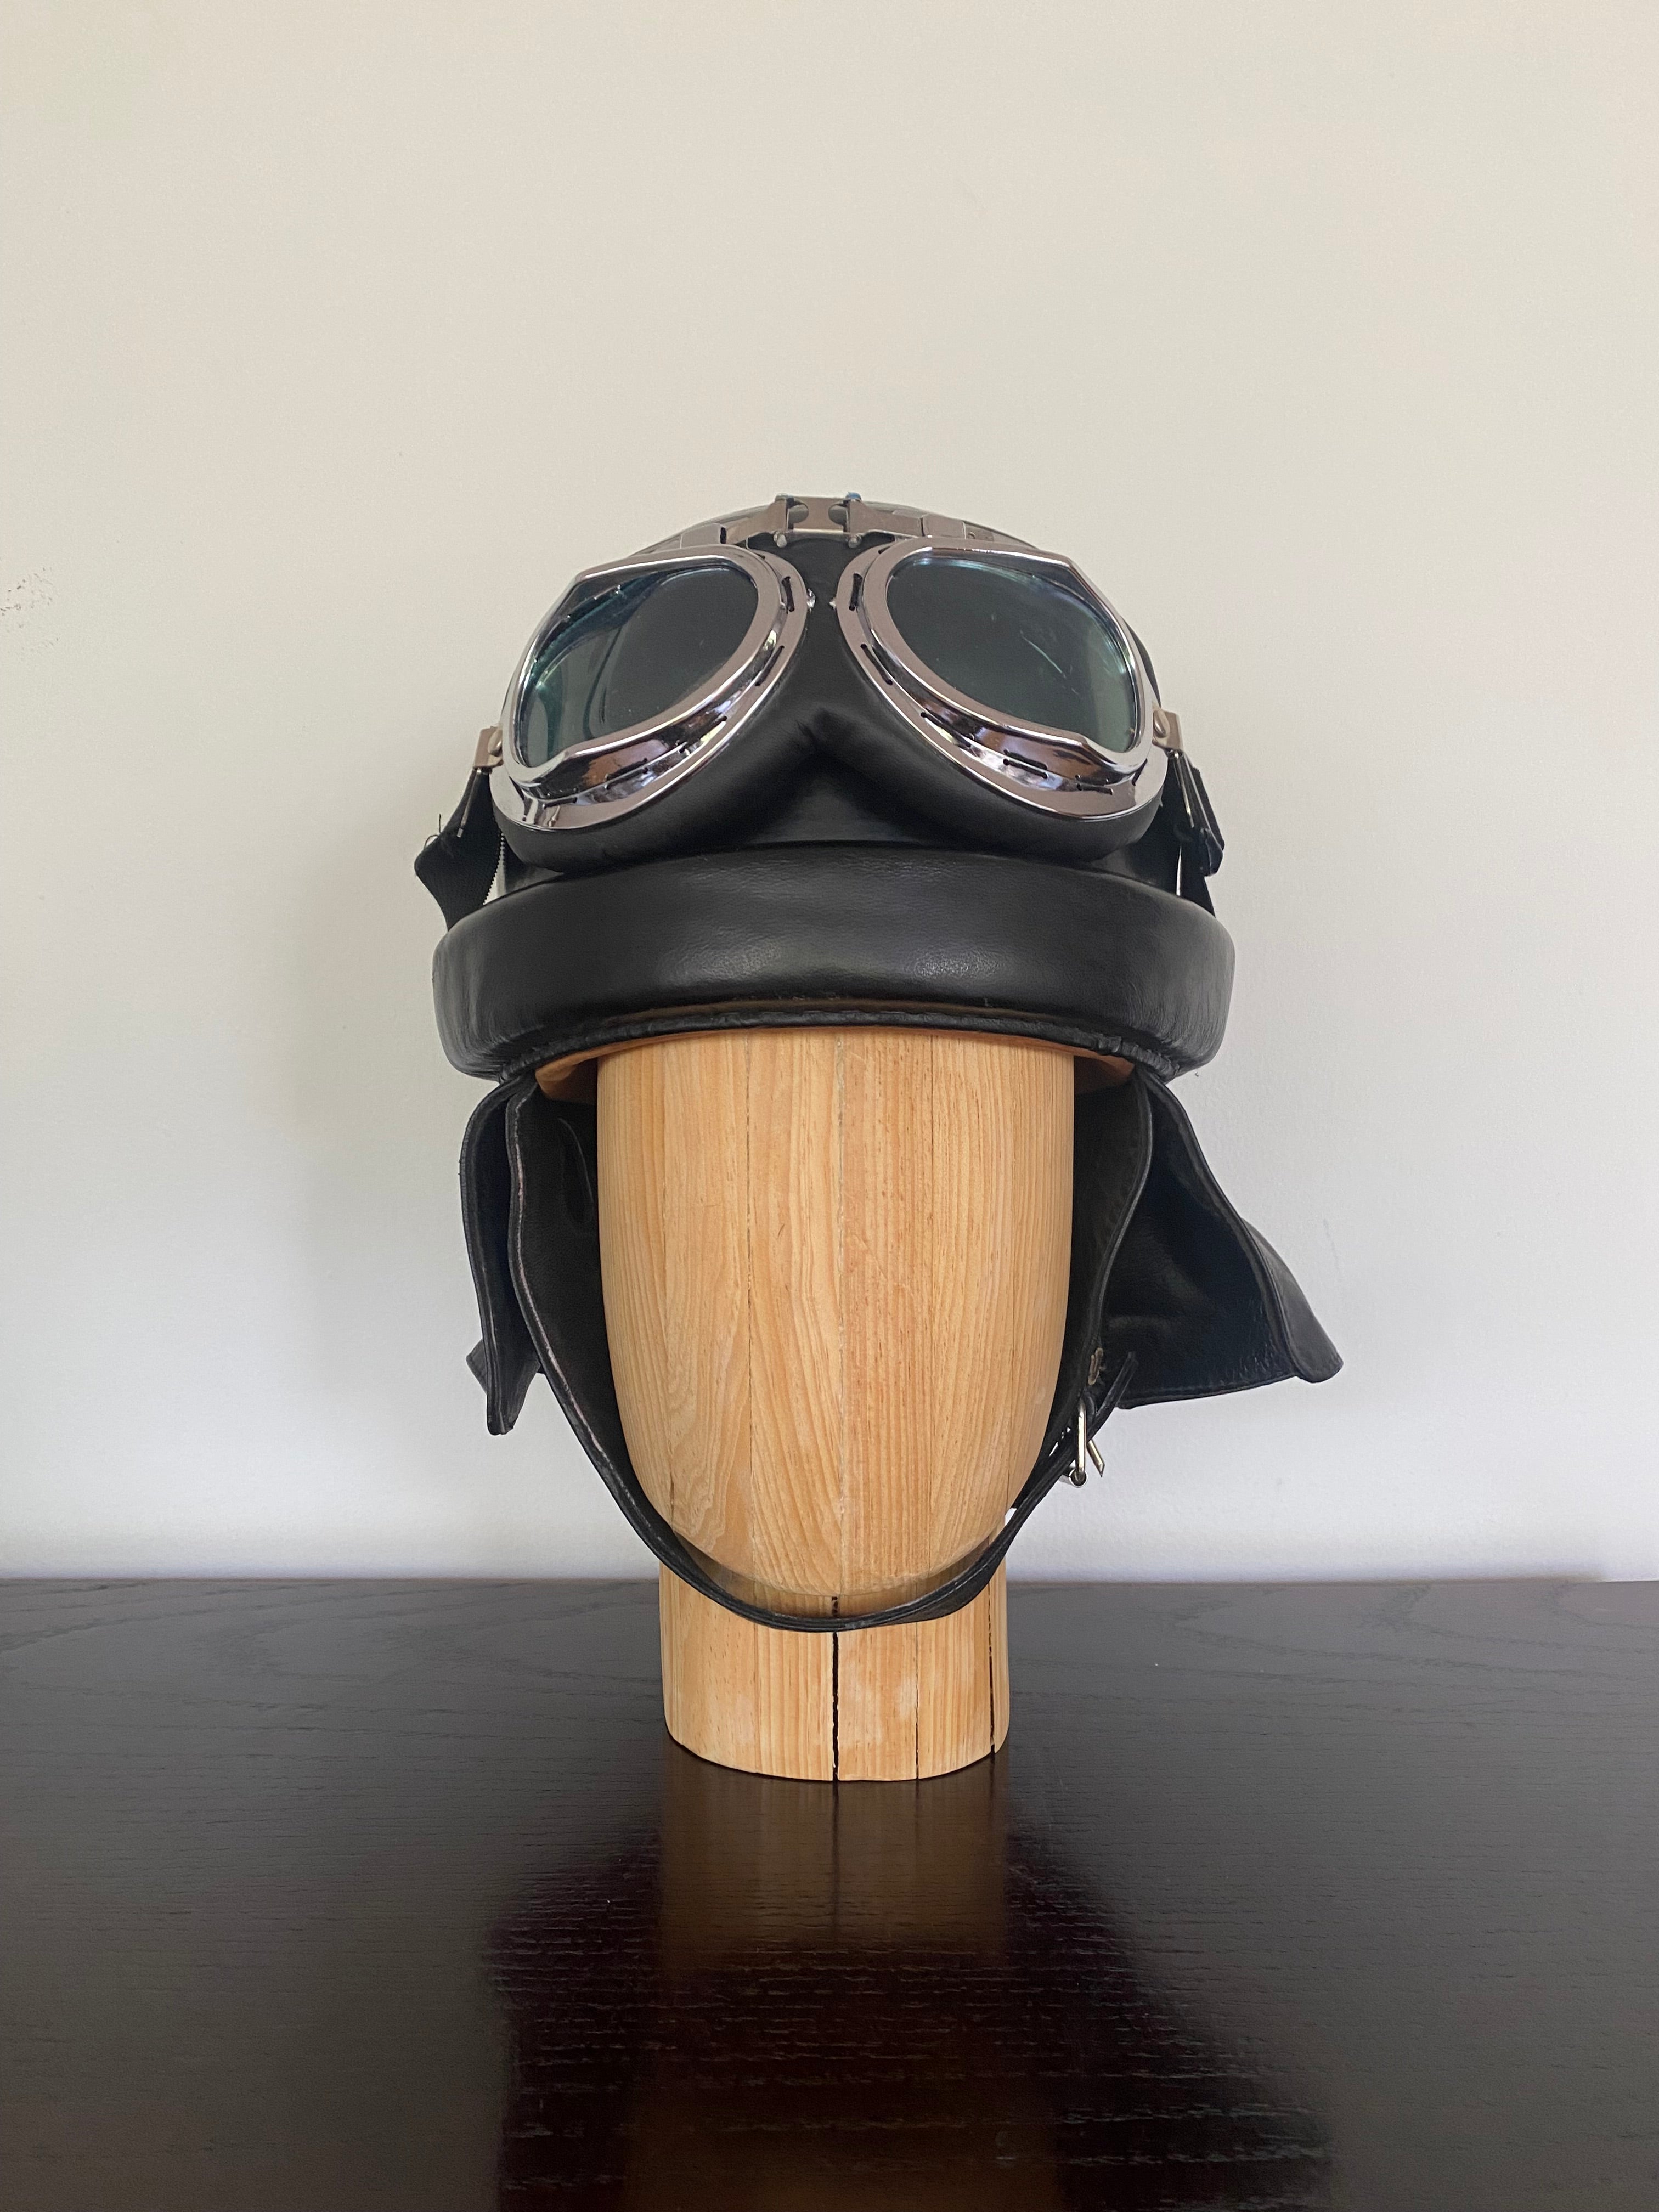 Original Italian Armored Division M35 helmet for tankers and motorcyclist , 1930s - 1960s